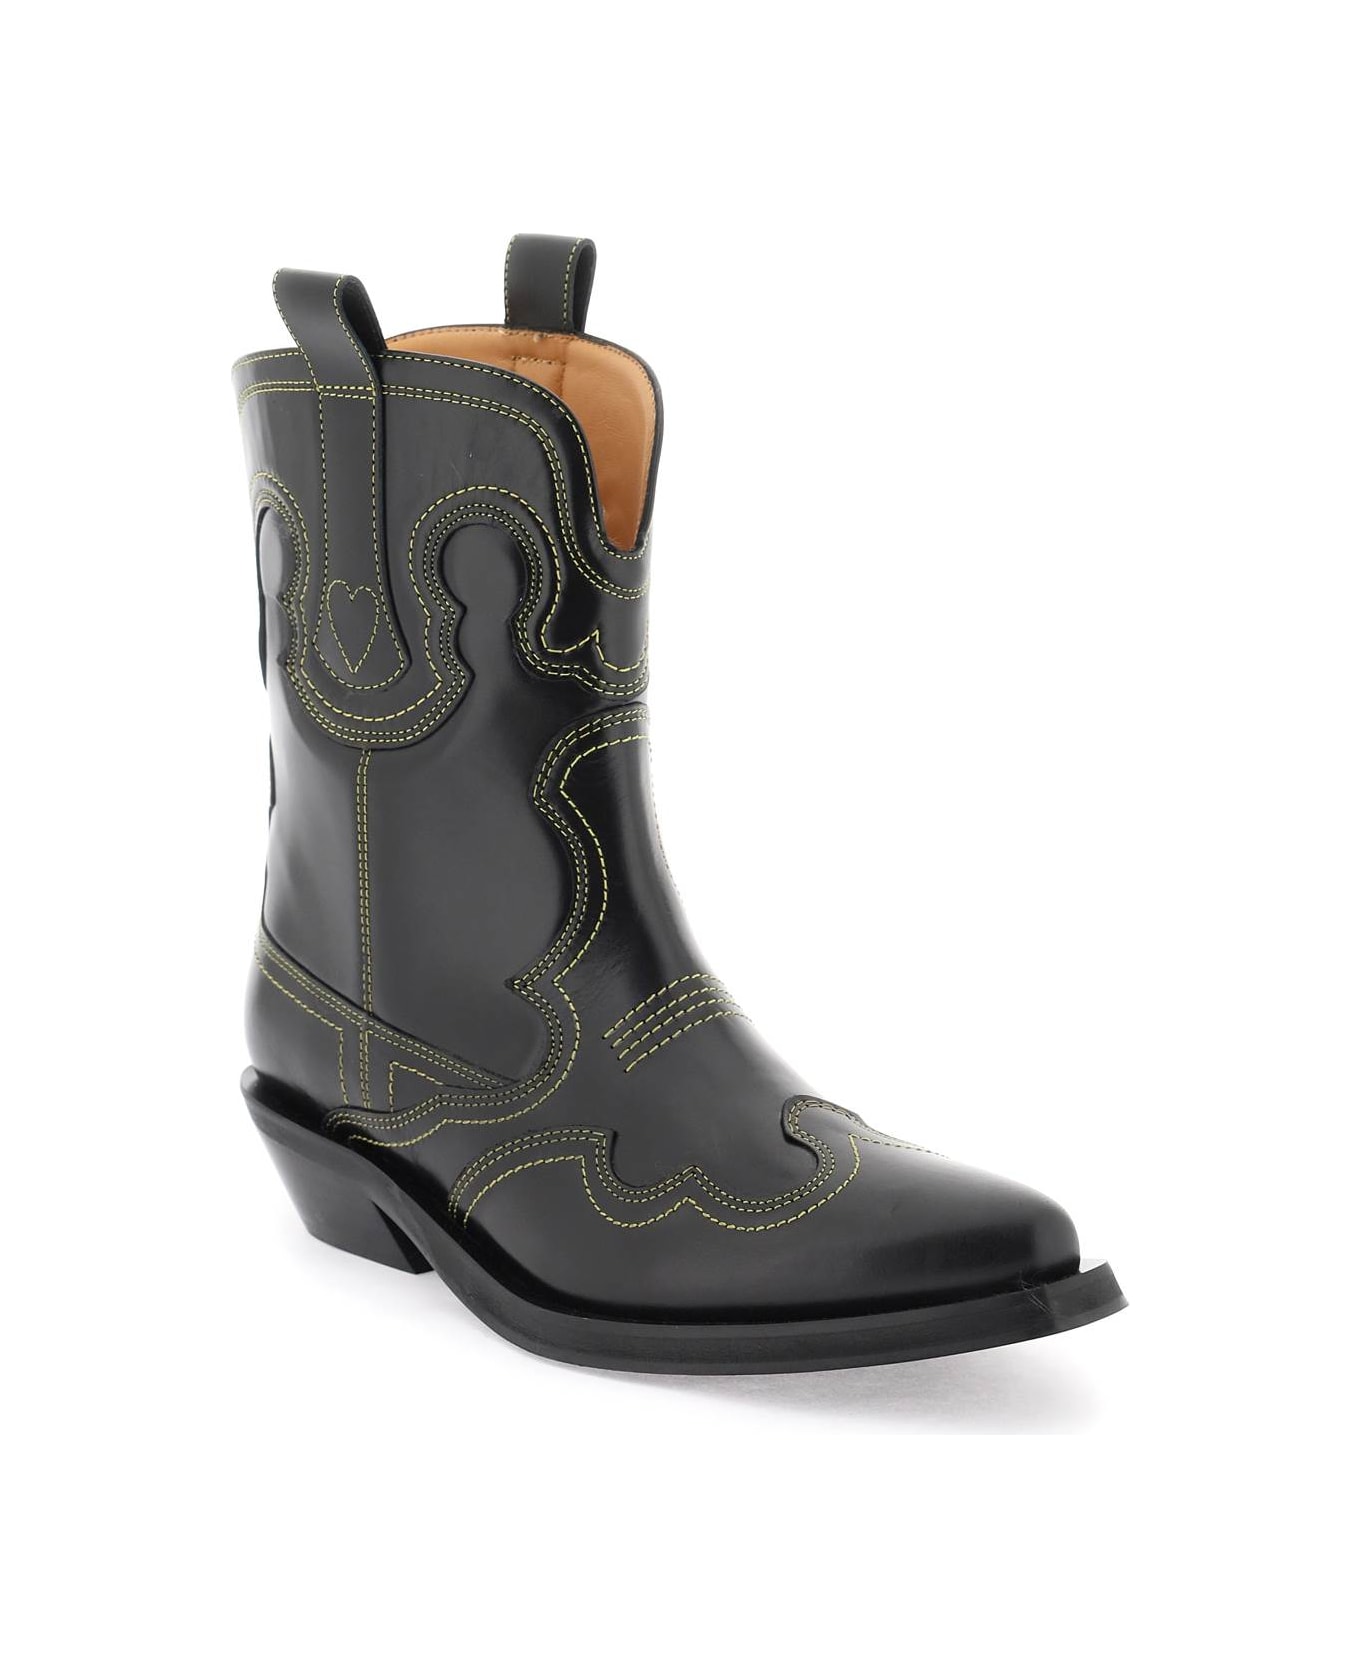 Ganni Embroidered Western Ankle Boots - Black/yellow